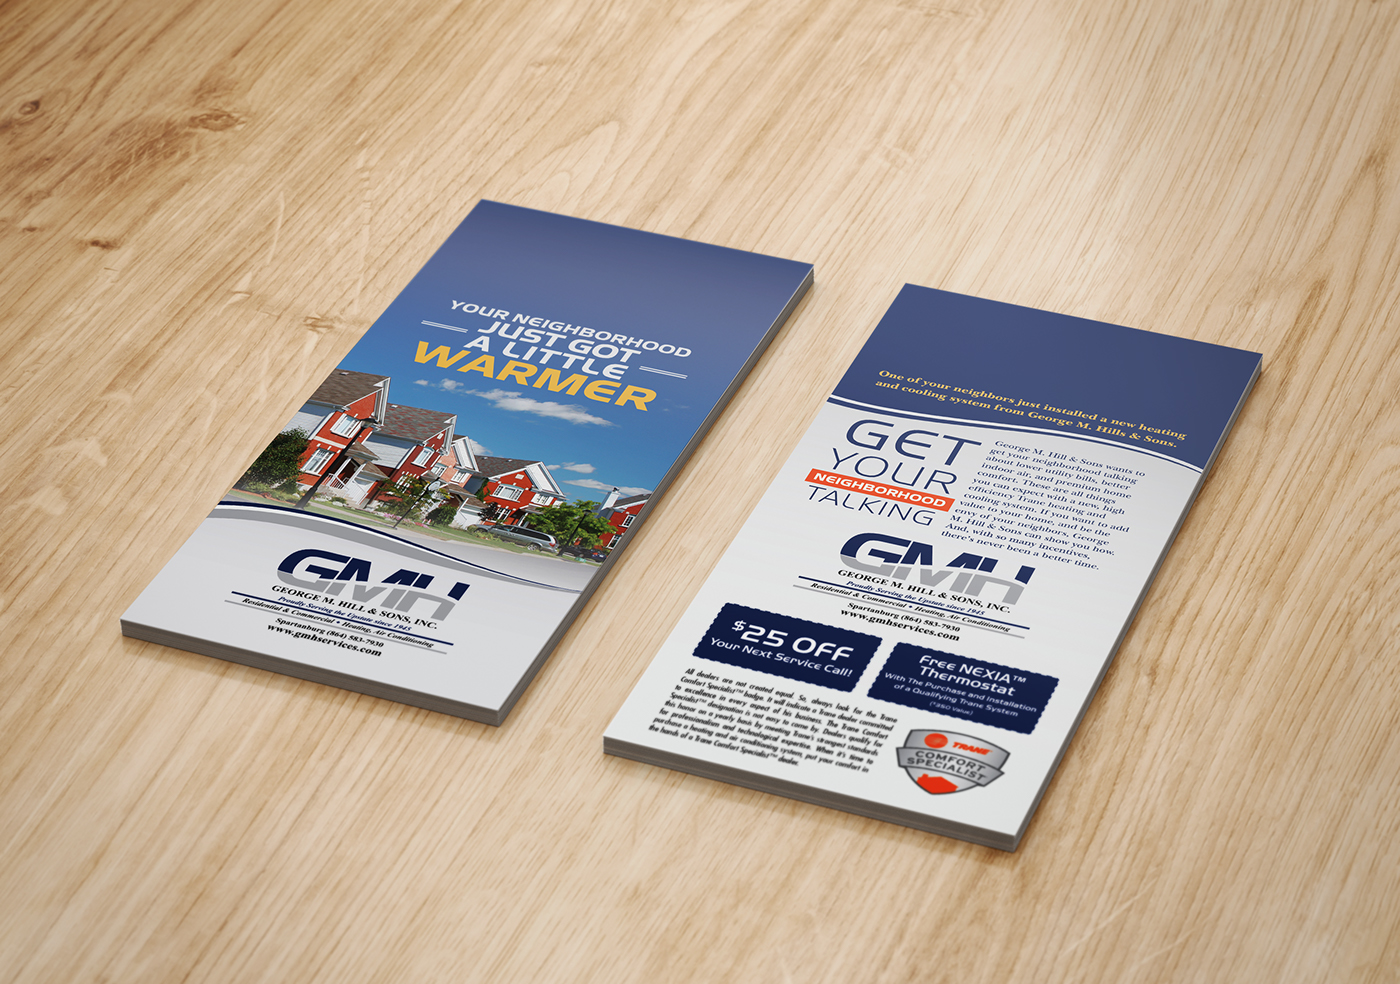 flyer Business Cards postcards Direct mail brochures door hangers infographics newsletters tri-folds Billboards posters Display book cover punch card